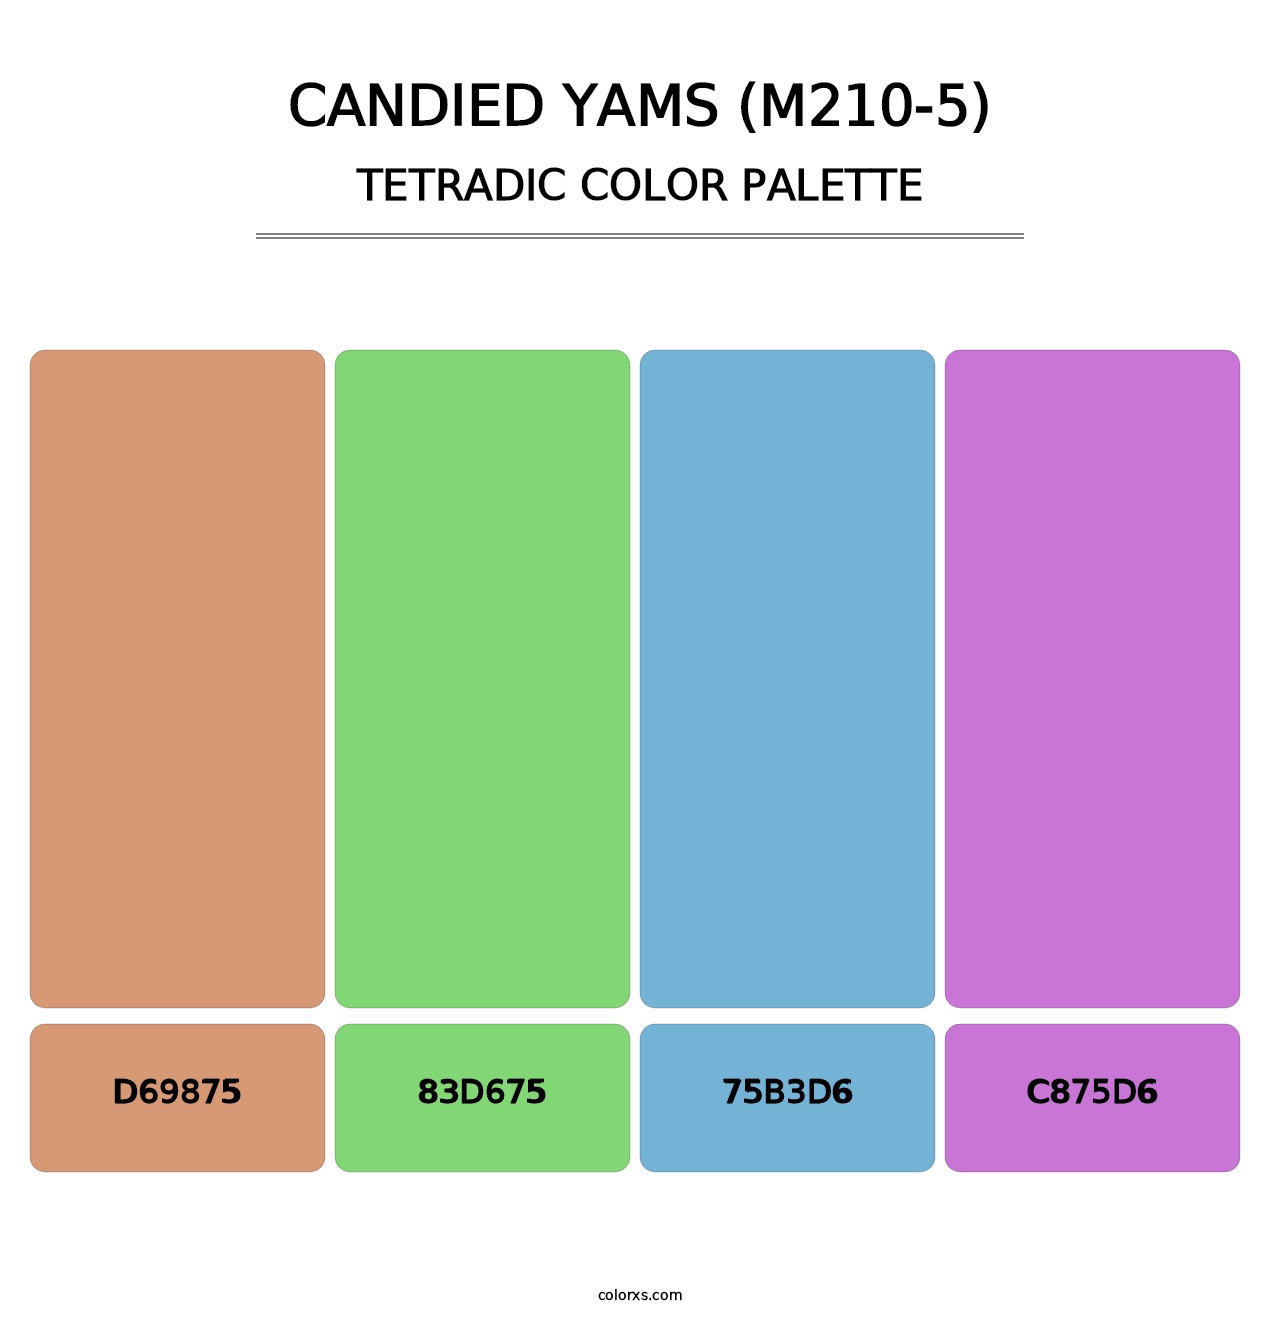 Candied Yams (M210-5) - Tetradic Color Palette